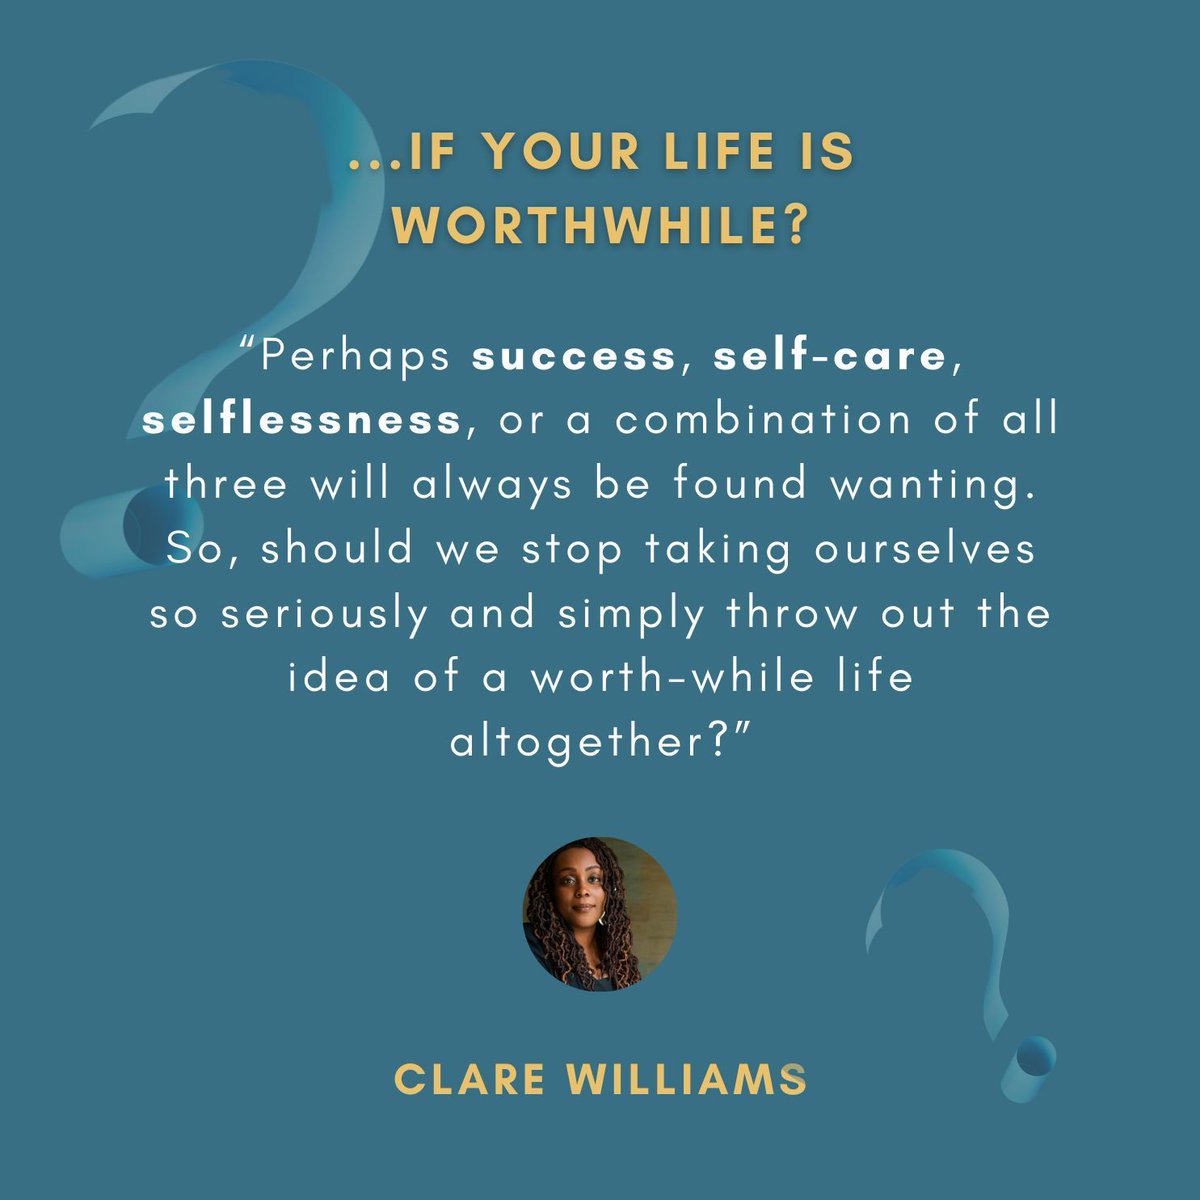 Have you ever wondered if your life is worthwhile? If there's more to life than success, self-care, or even selflessness? Check out buff.ly/3UpP7sx for this and other great spiritual conversation starters.